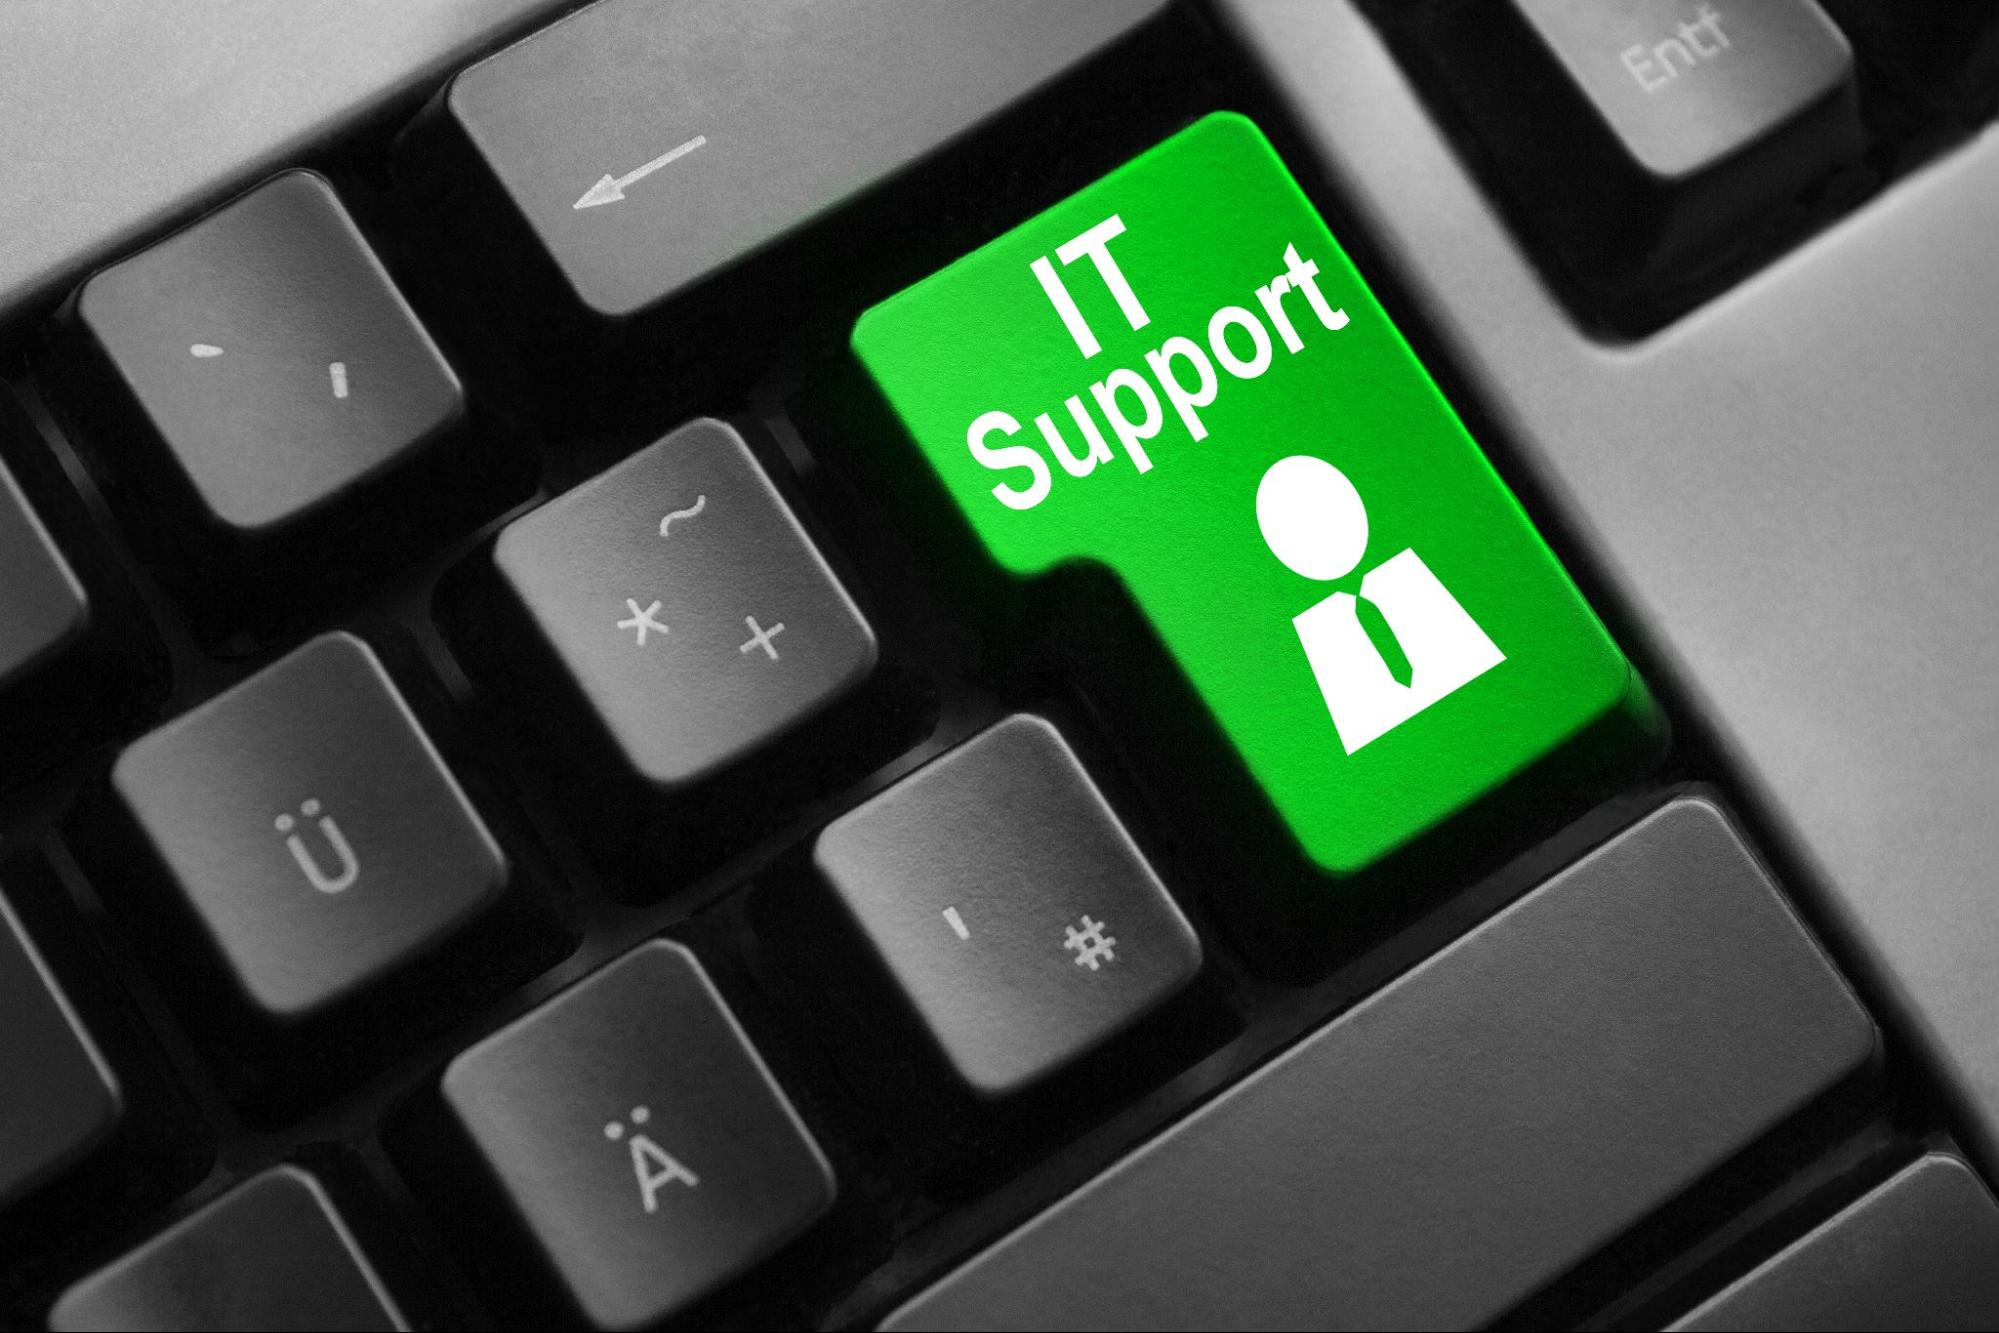 A computer keyword with a green button that says IT Support